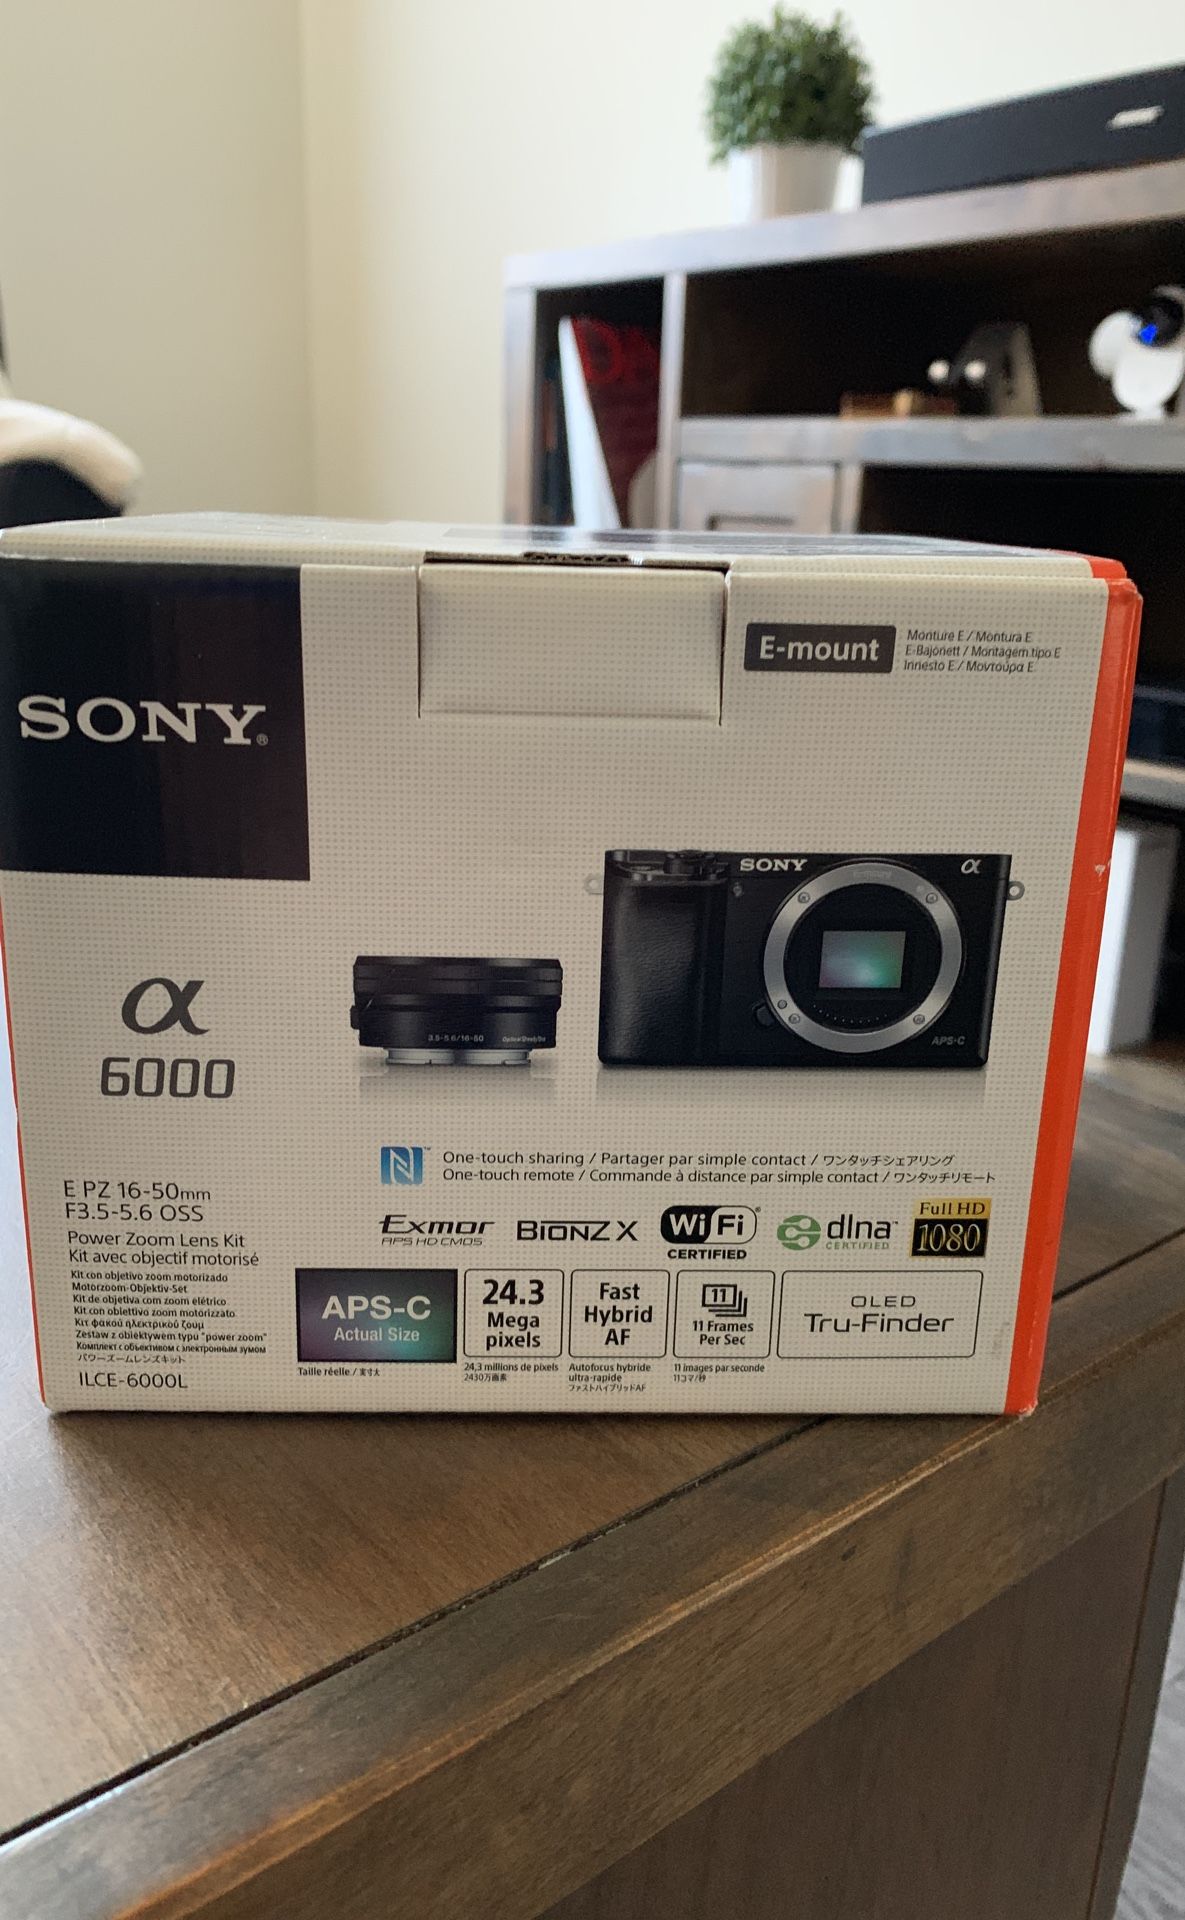 Sony a6000 camera: 16-50mm lens, box and bag included